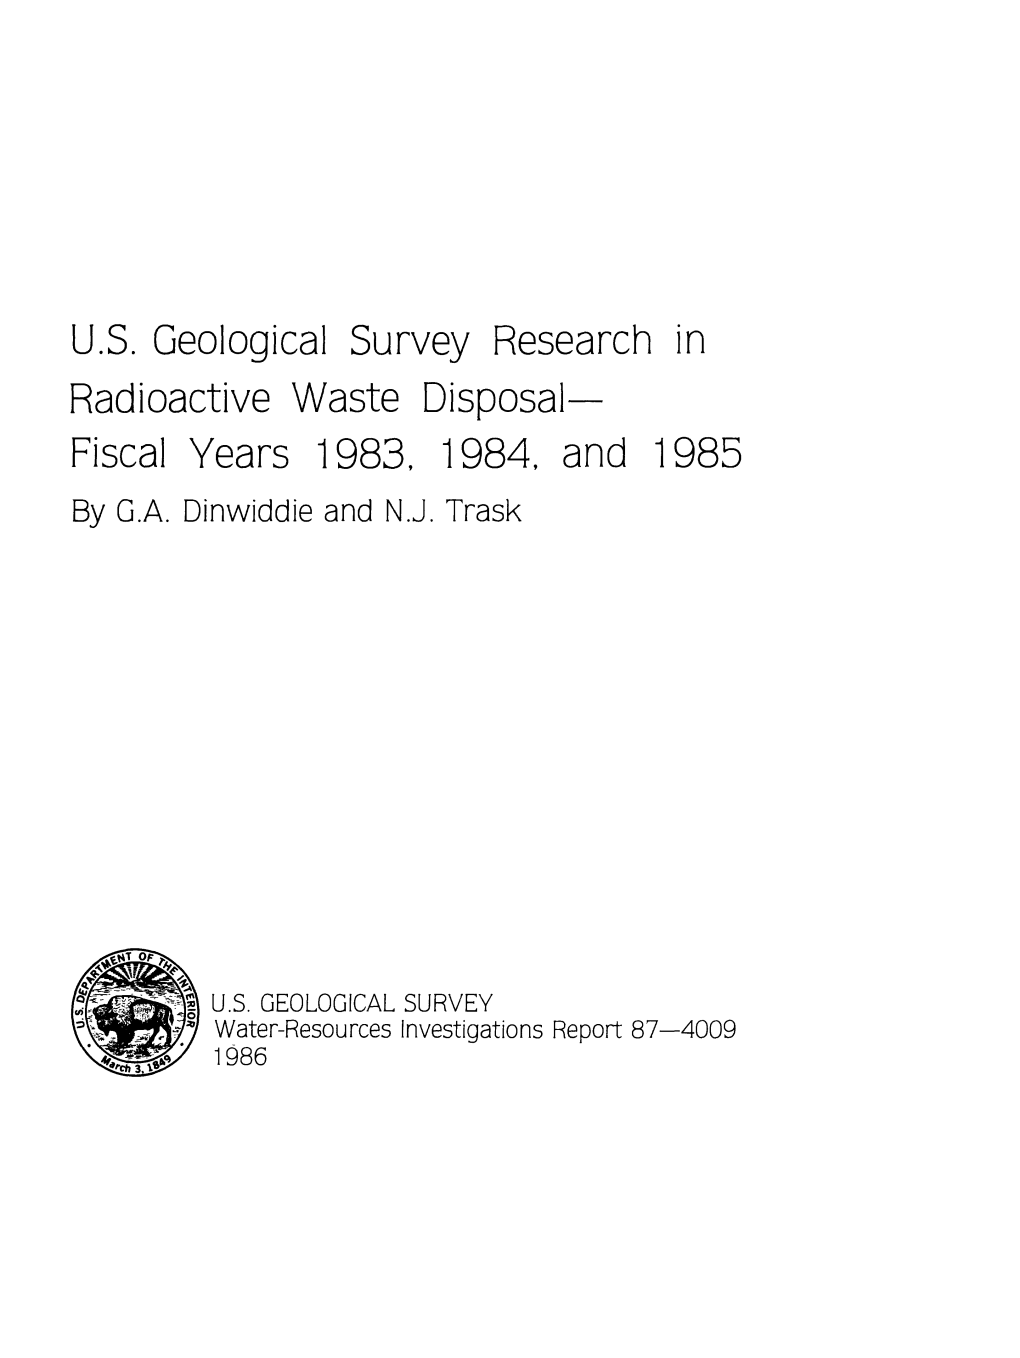 US Geological Survey Research In